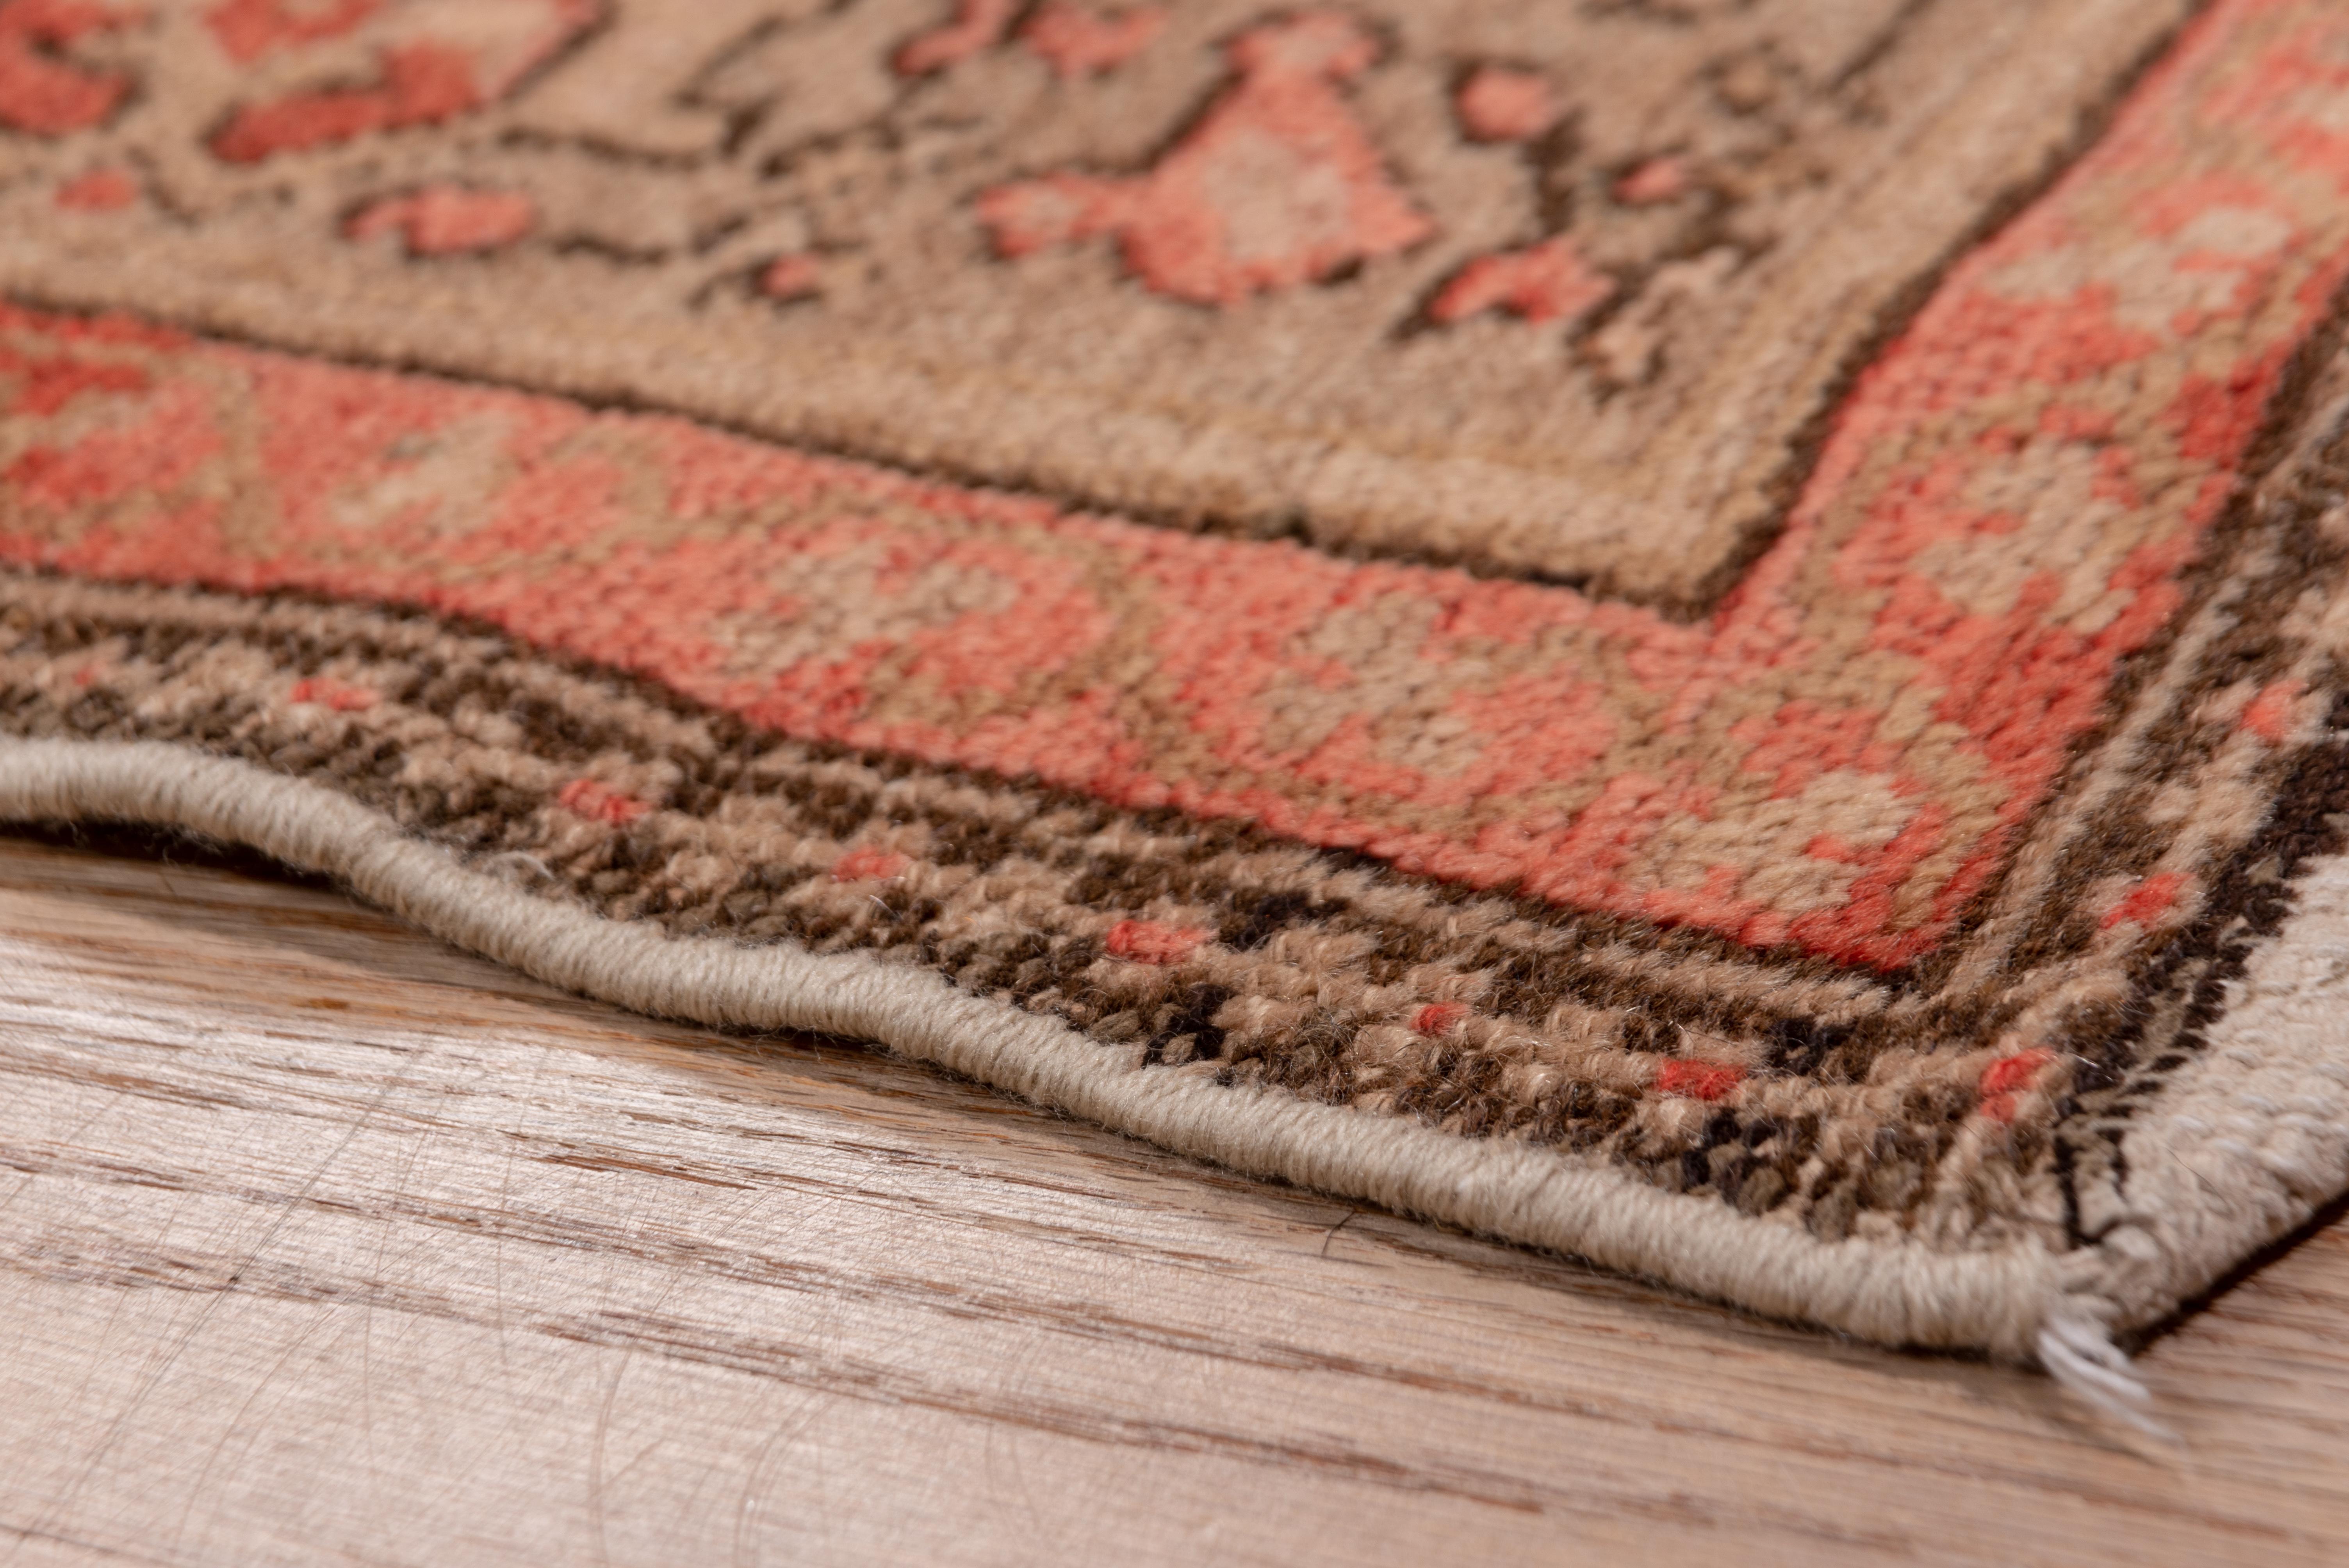 This west Persian village kellegi (long rug) displays a coral-rust field two tone field with a version of the Gol Hennai (Hemp flower) large lattice pattern with sand, straw and chocolate accents. Stencil reversing turtle border. Cotton foundation.